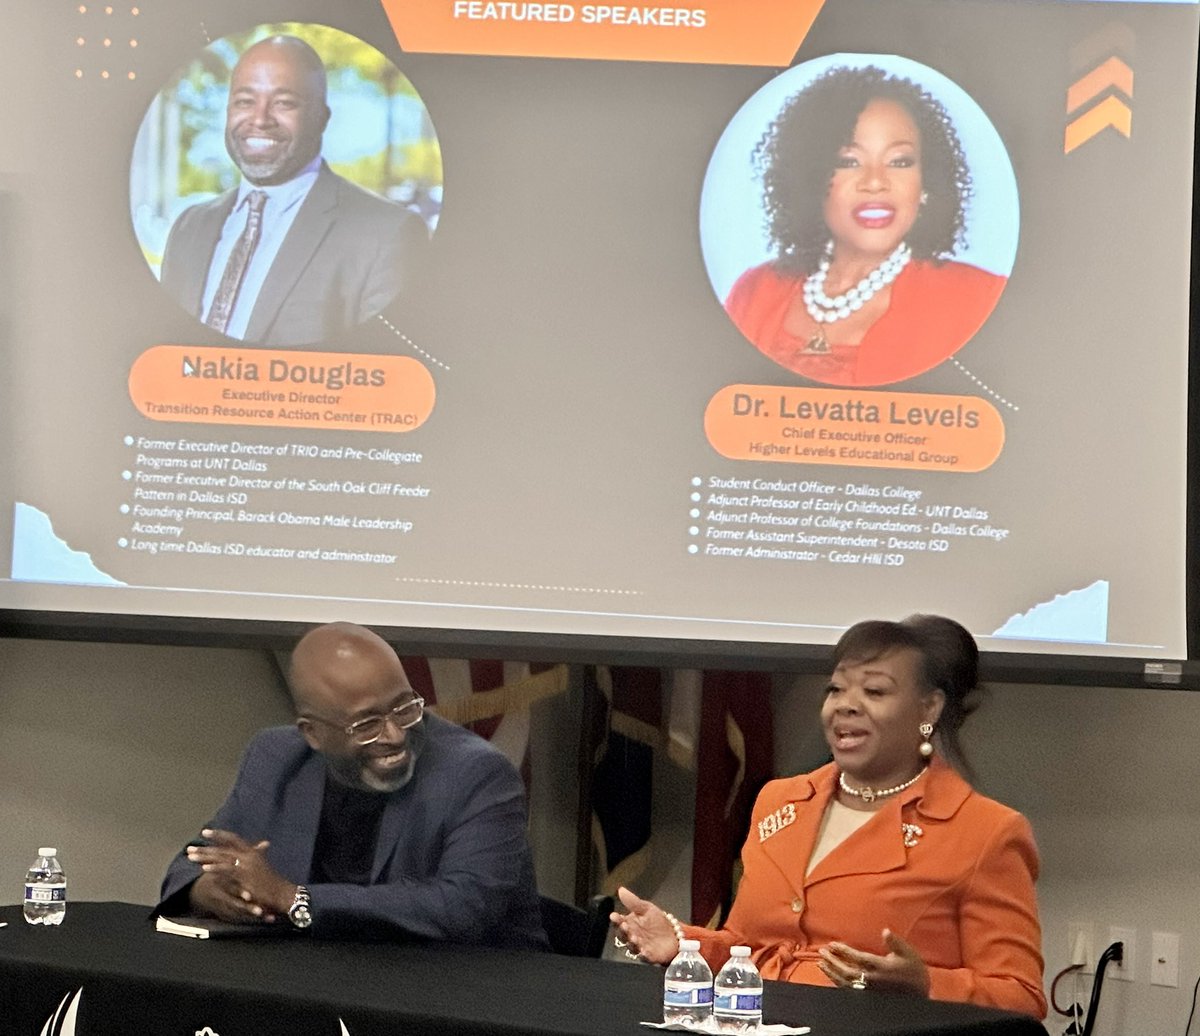 Thank you to these two phenomenal speakers @NakiaDouglas75 & @3lllevels for your impact in education!  Equitable opportunities & resources must be a nonnegotiable for the success of all Ss especially Ss of color! @SWDCABSE @TABSE_Texas #BeTheImpact #KnowYourStory